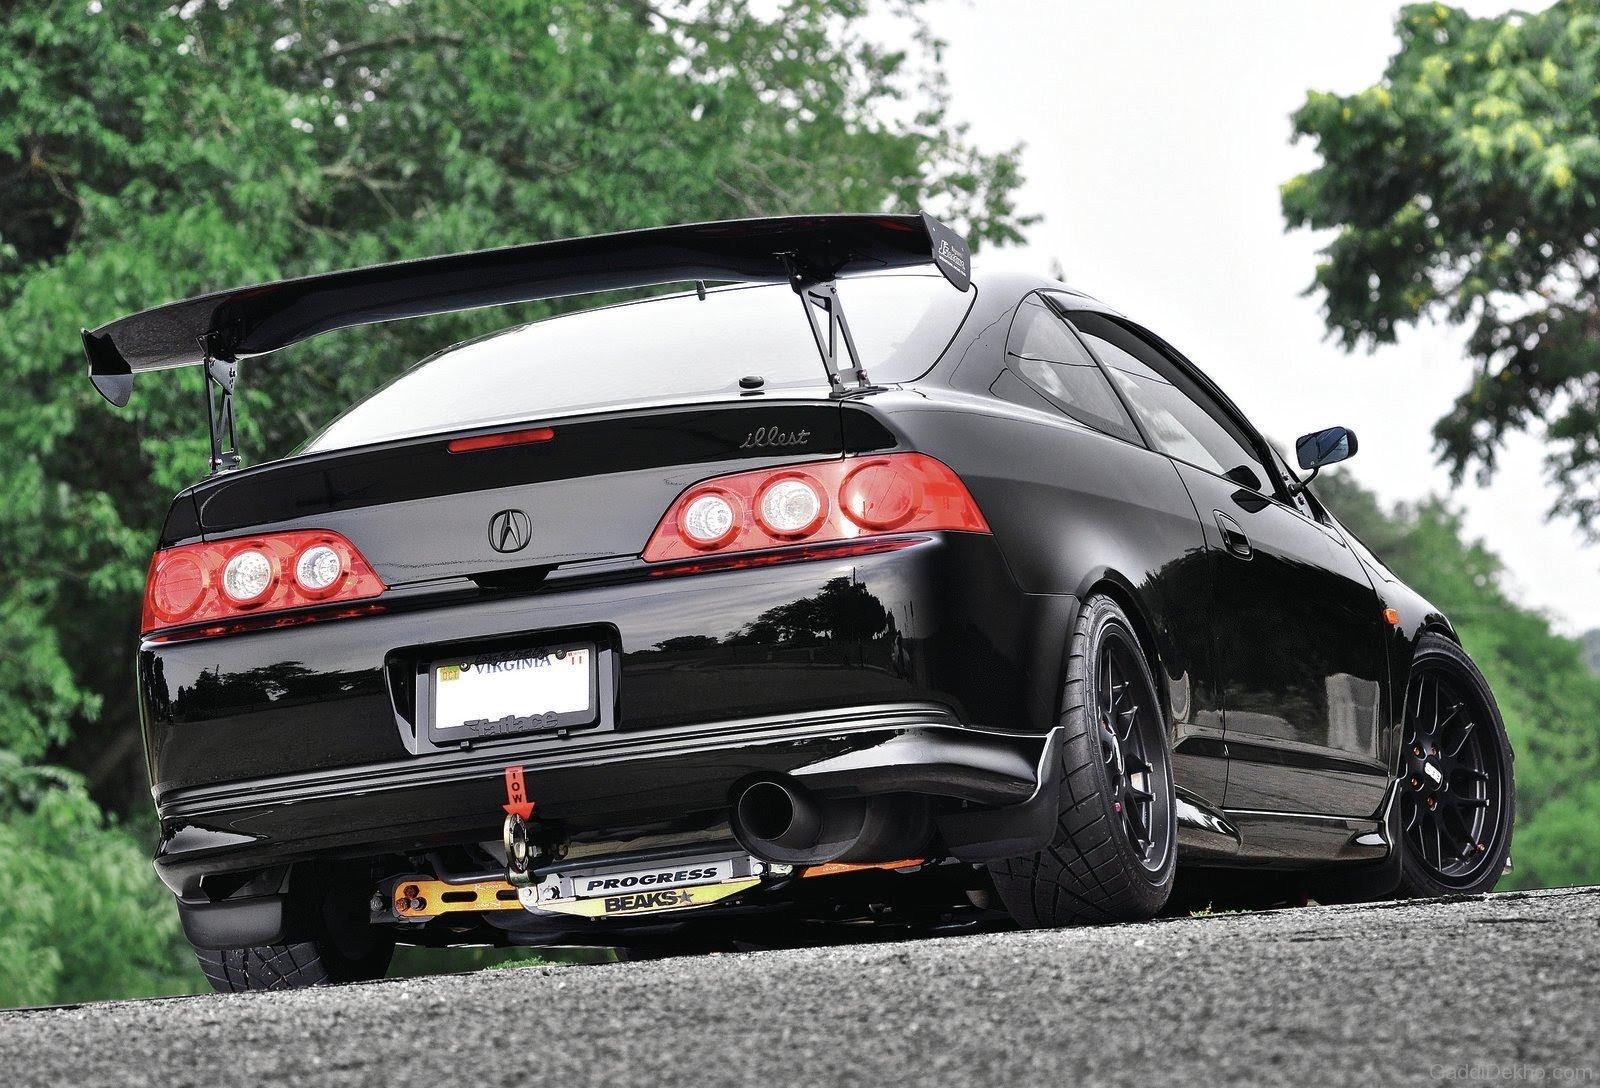 Acura RSX Wallpapers and Backgrounds Image.